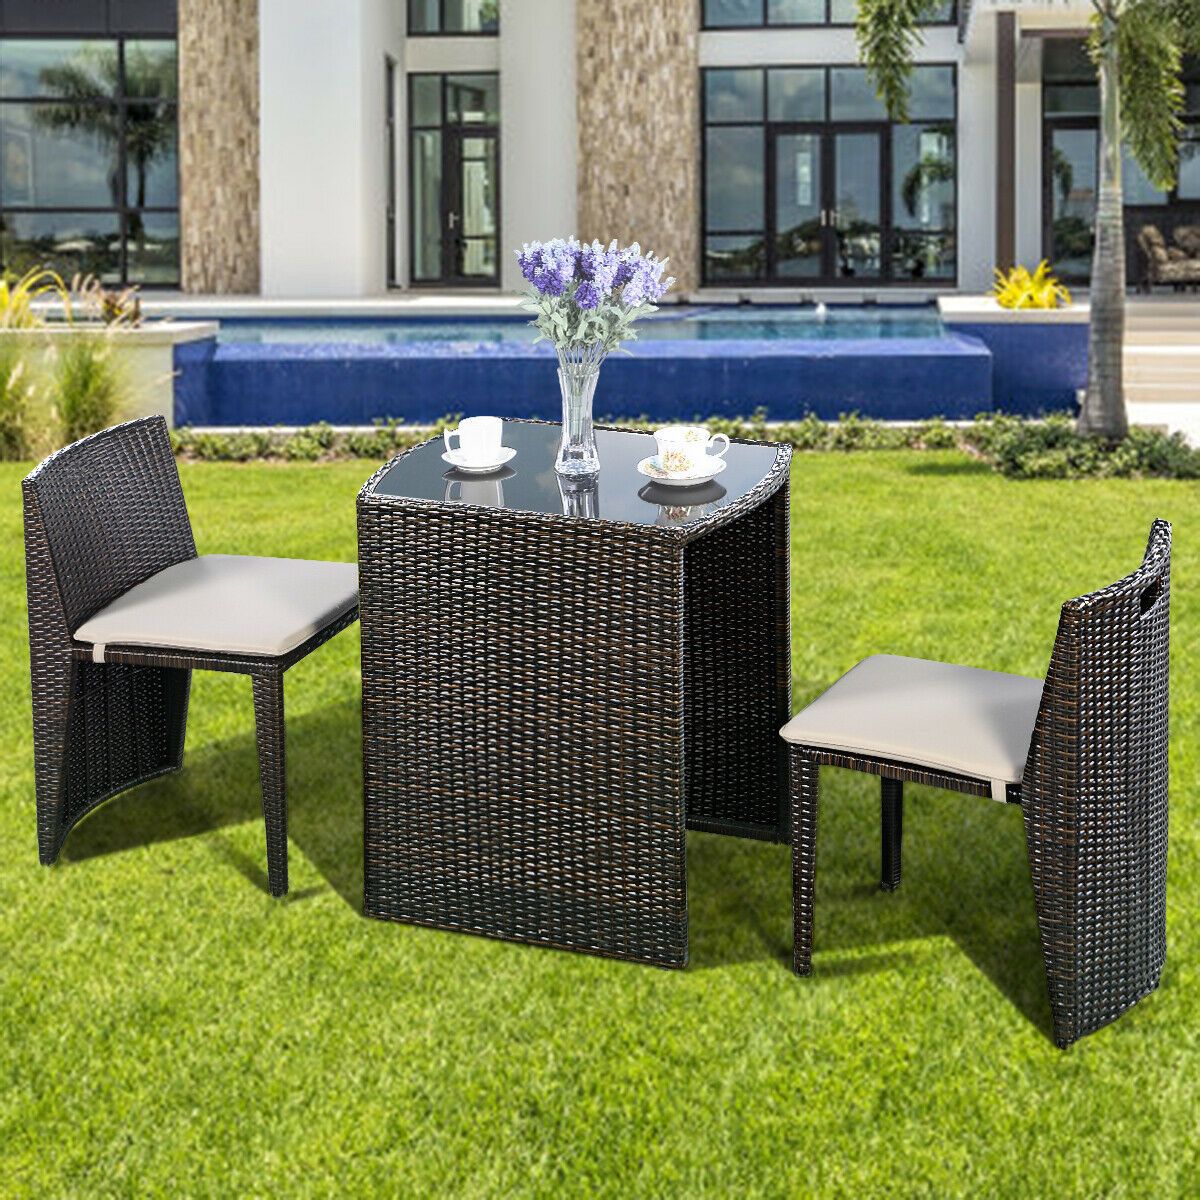 3 Pcs Cushioned Outdoor Wicker Set For Garden Lawn Patio (Brown)